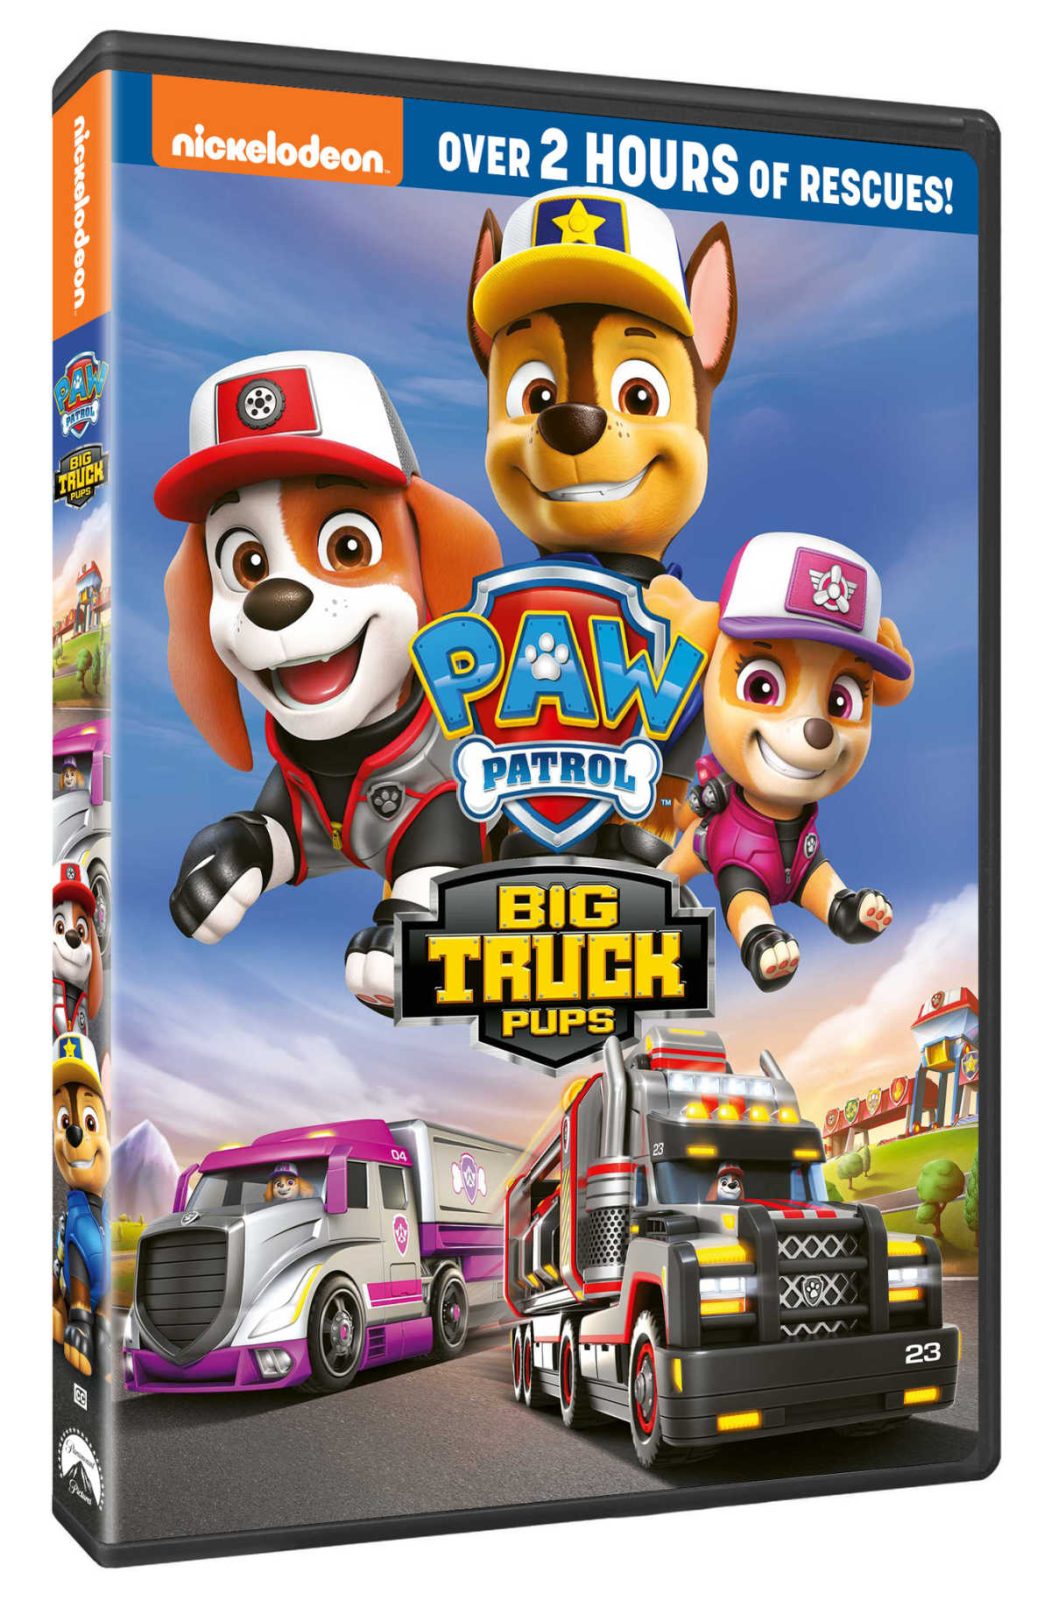 Kids can enjoy over 2 hours of rescues, when you get them the new PAW Patrol Big Truck Pups DVD from Nickelodeon. 